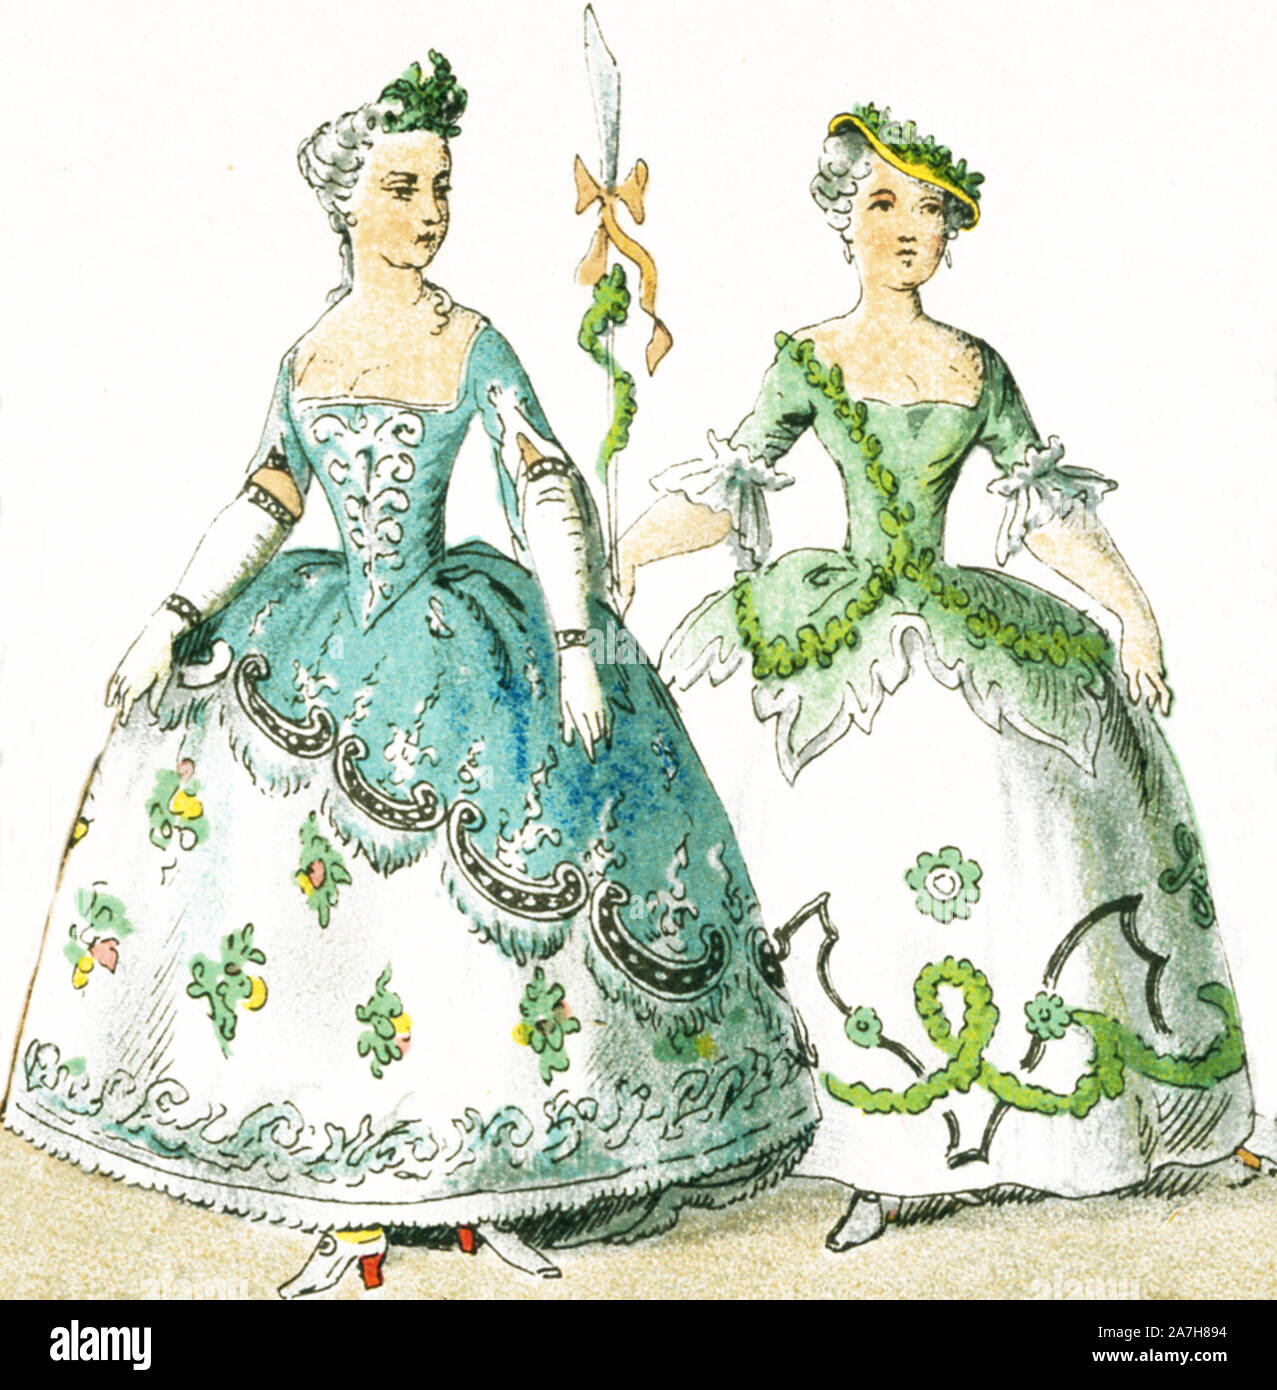 Shown here are two French women between 1750 and 1800. They are from left to right: two costumes of balls and masks. This illustration dates to 1882. Stock Photo